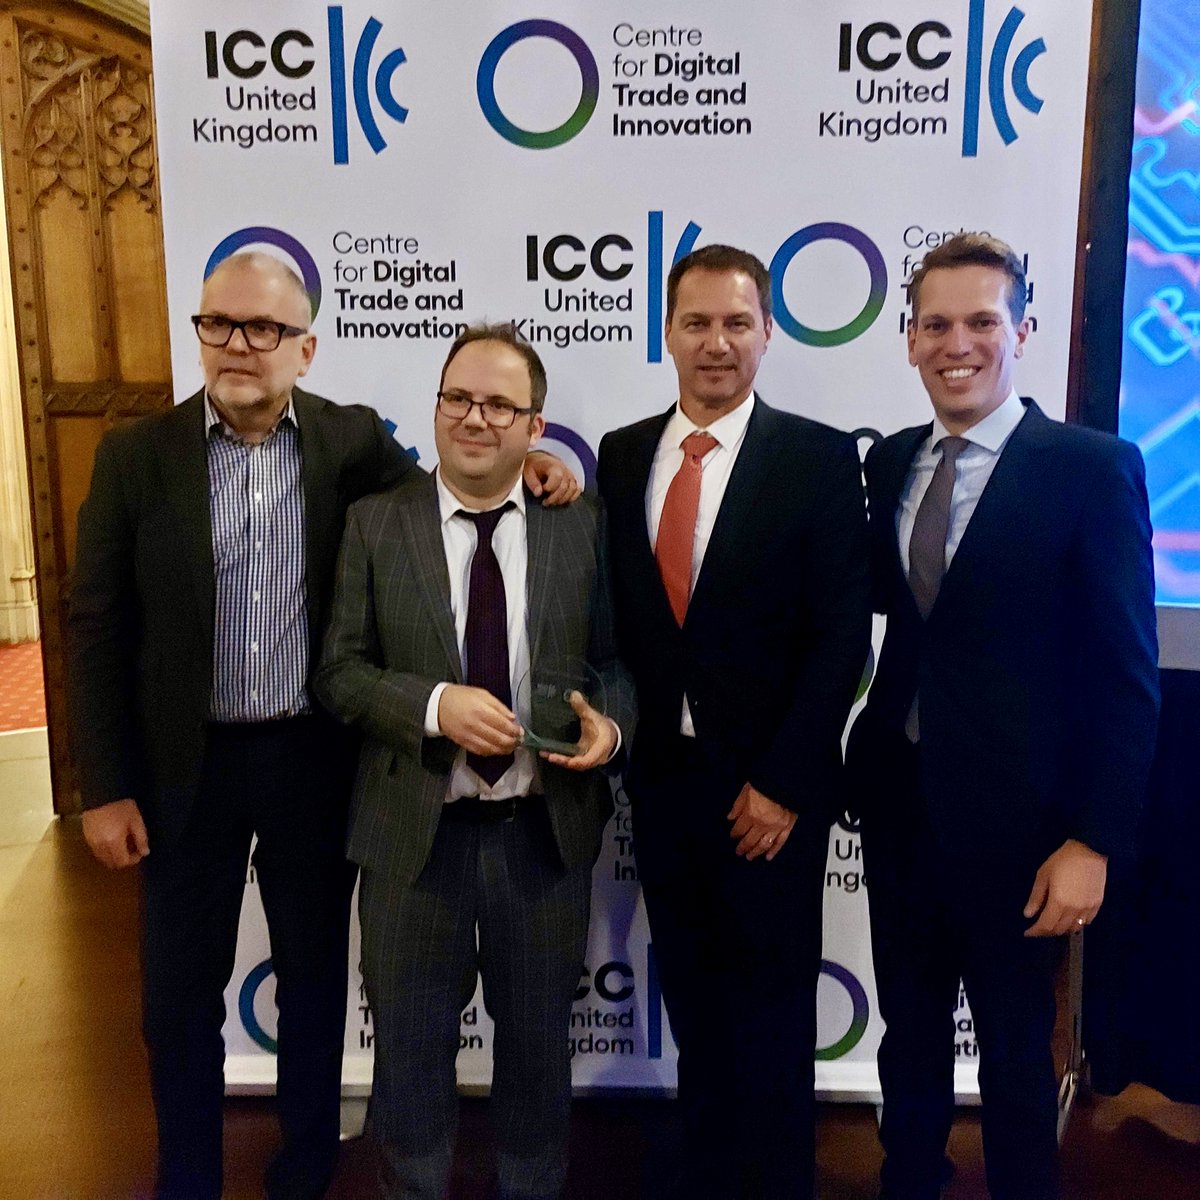 CargoX, Lloyds Bank, and Enigio have been awarded the Best Use of Interoperable Digital Trade Technology in the #Banking Sector Award at the ICC C4DTI Digital Trade Awards #C4DTIAwards #interoperability #fintech #BankingInnovation  cargox.io/content-hub/ll…